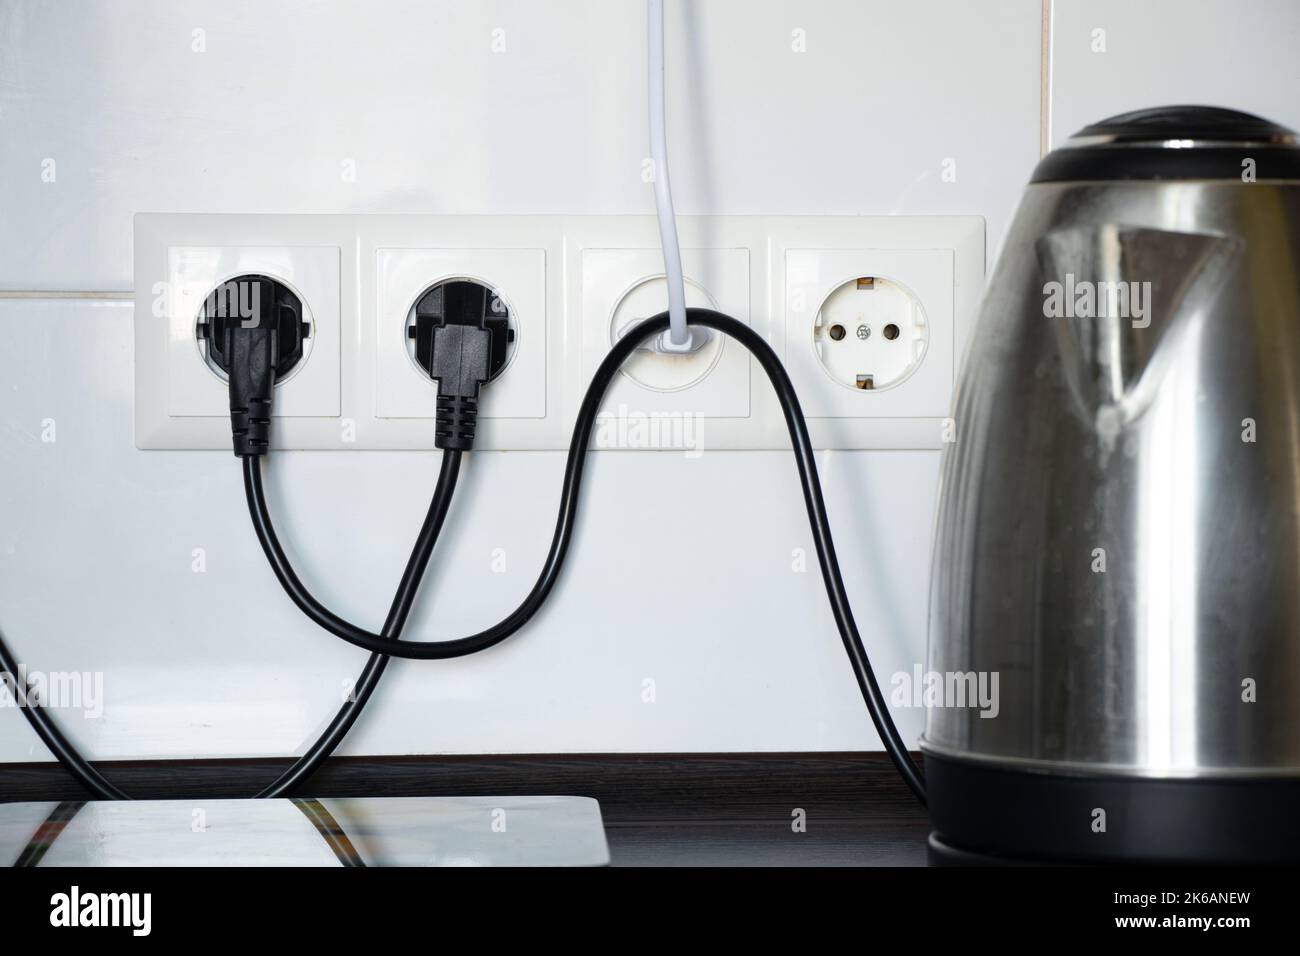 https://c8.alamy.com/comp/2K6ANEW/kitchen-and-electric-kettle-on-the-table-near-the-socket-against-the-background-of-white-tiles-kitchen-appliances-kitchen-furniture-and-appliances-2K6ANEW.jpg